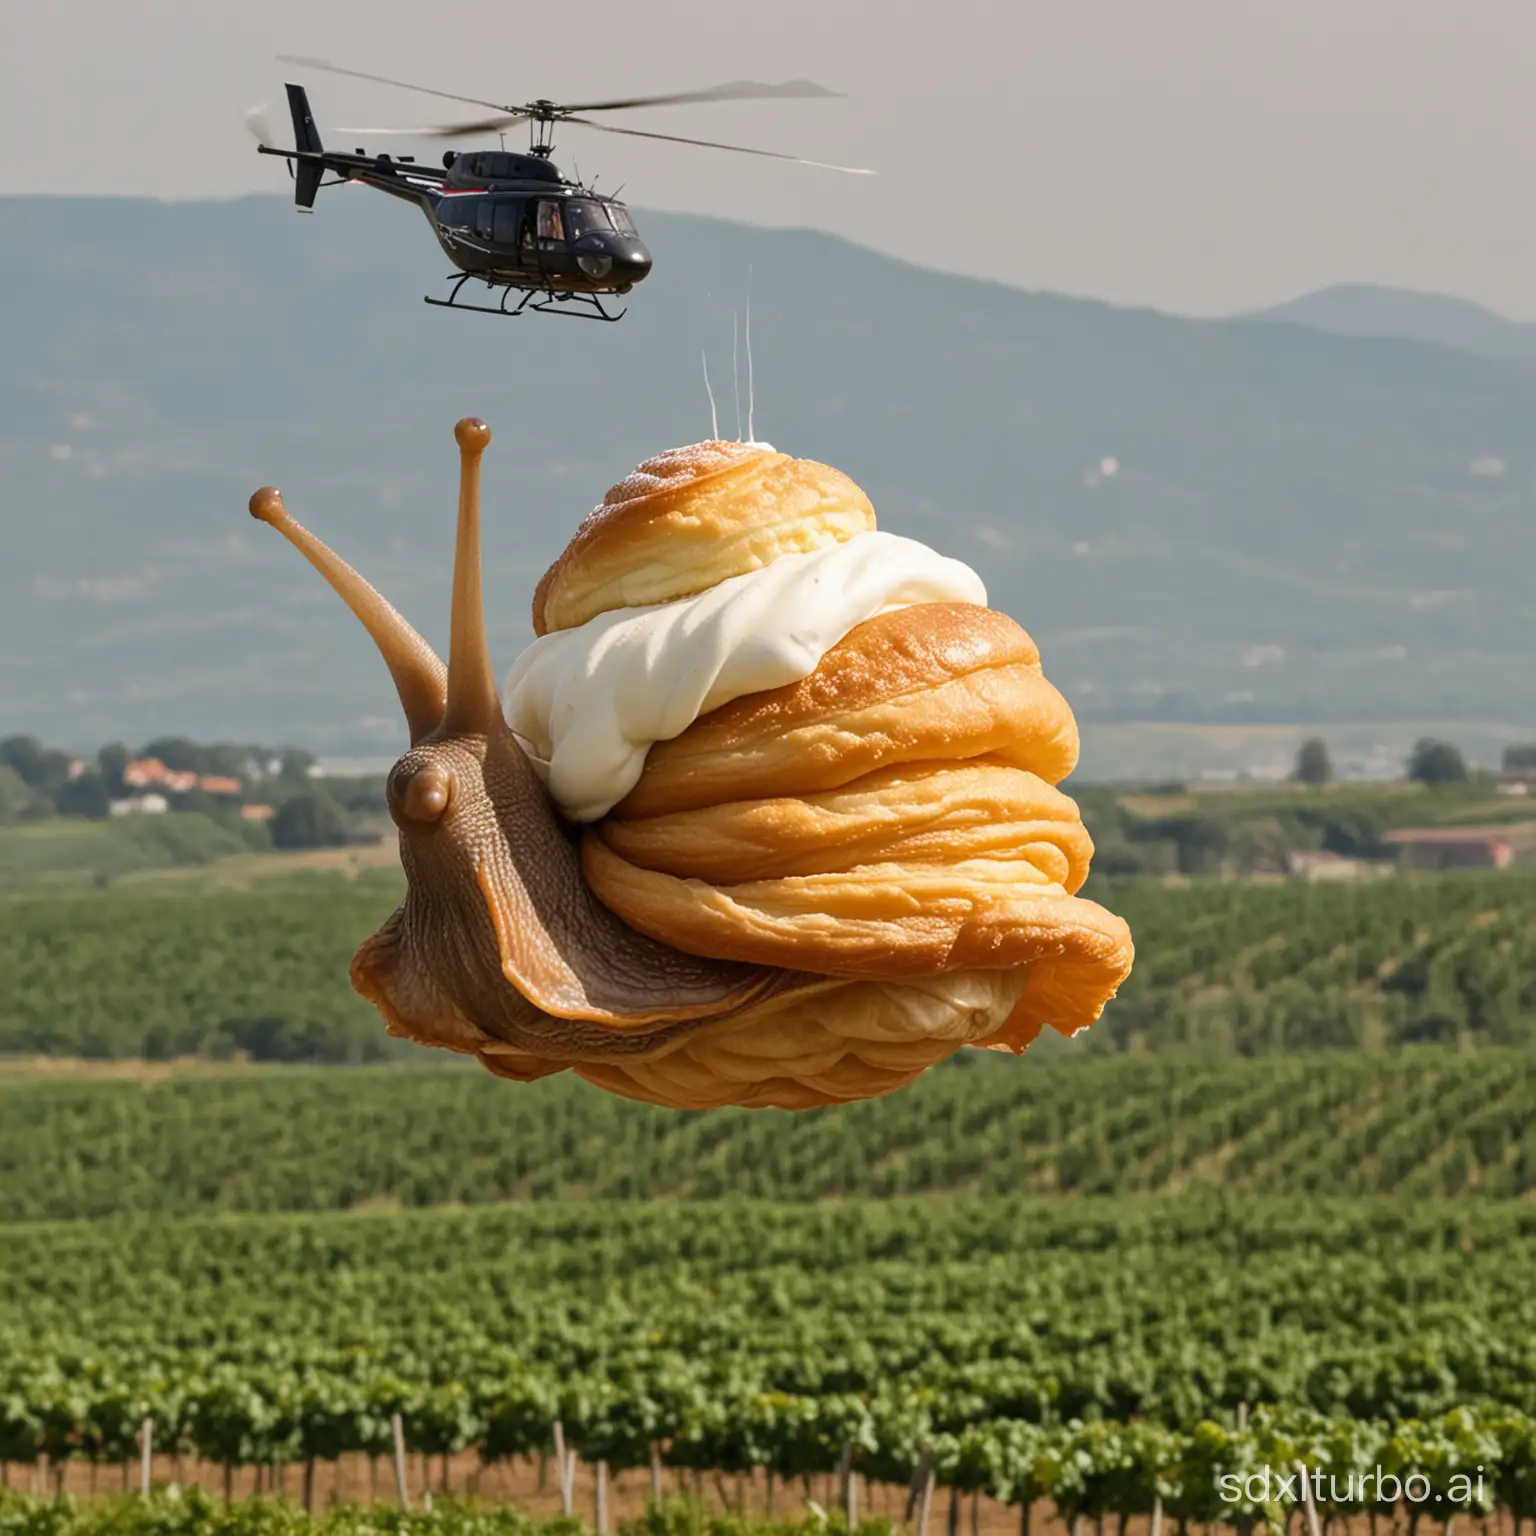 Giant-Vineyard-Snail-Carrying-Cream-Puff-with-Helicopter-Wings